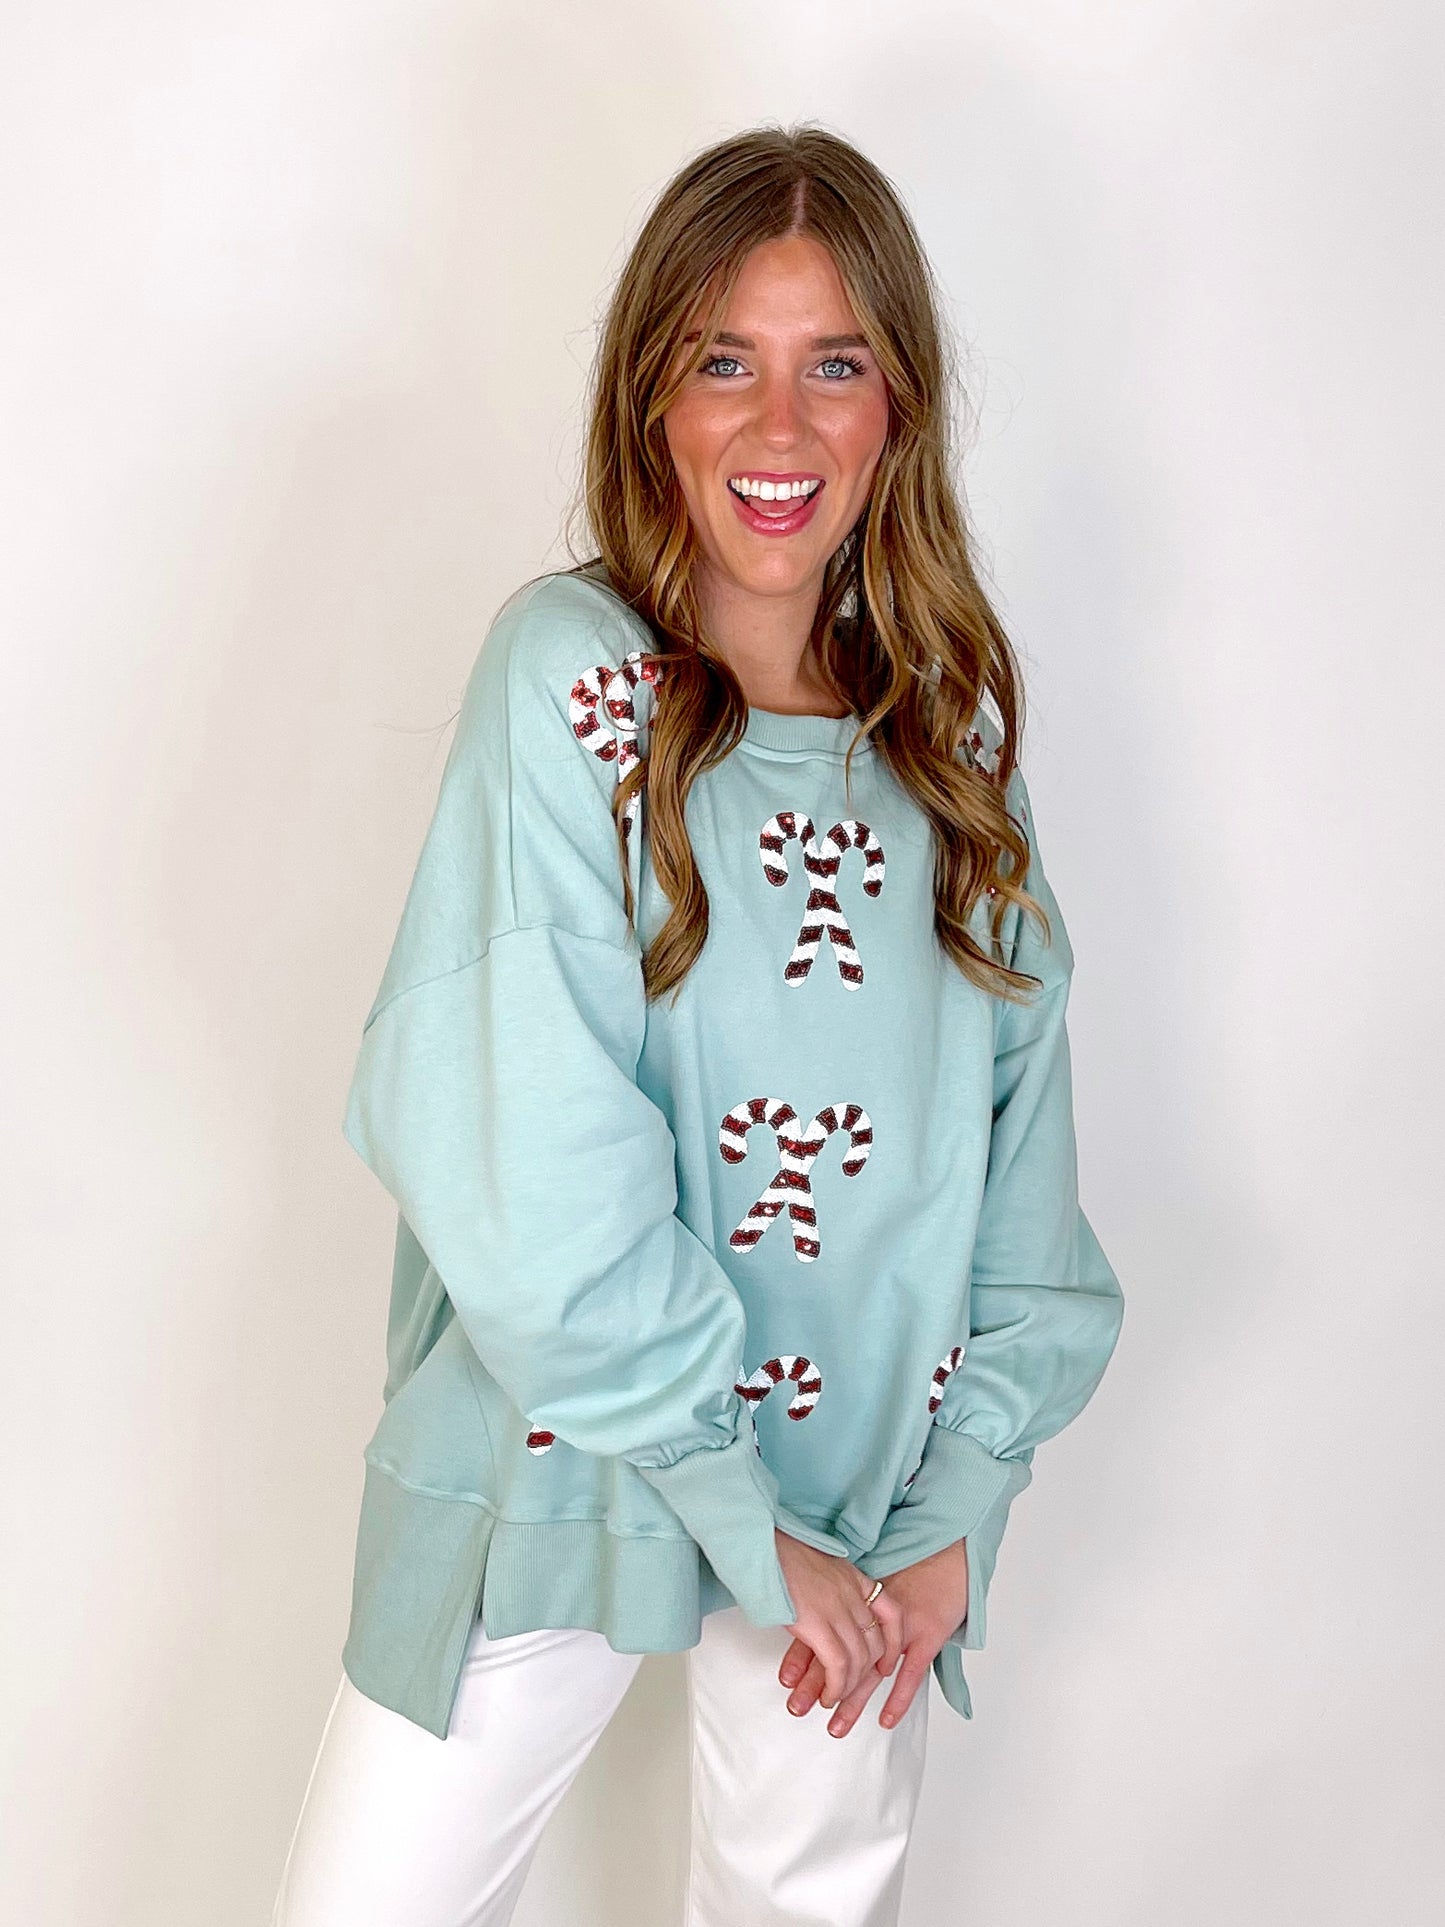 Taste of Christmas Sweatshirt-Sweatshirt-Fantastic Fawn-The Village Shoppe, Women’s Fashion Boutique, Shop Online and In Store - Located in Muscle Shoals, AL.